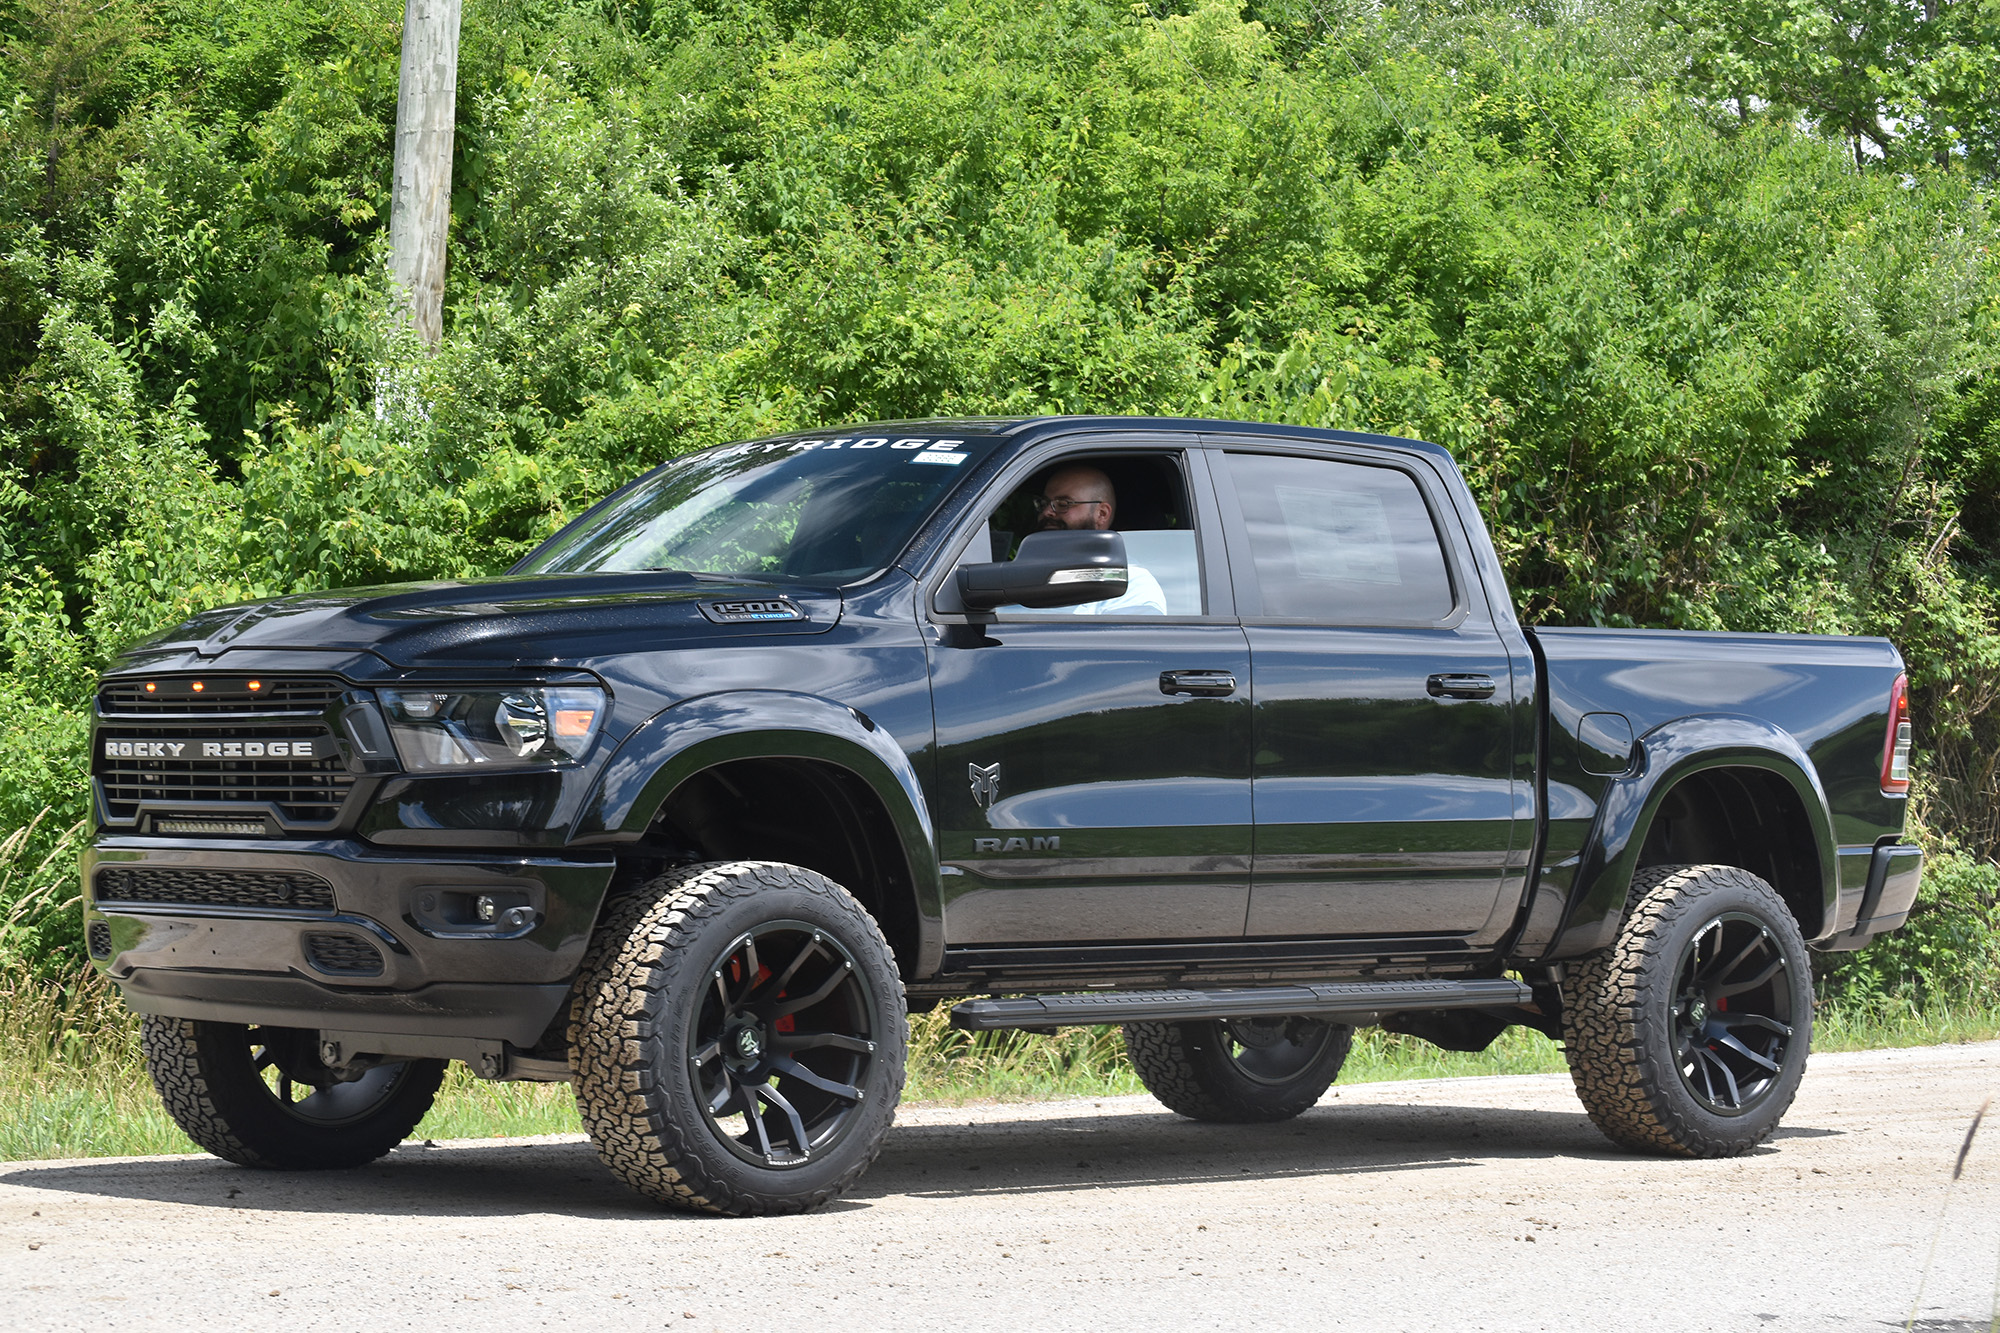 online-listings-for-lifted-trucks-in-texas